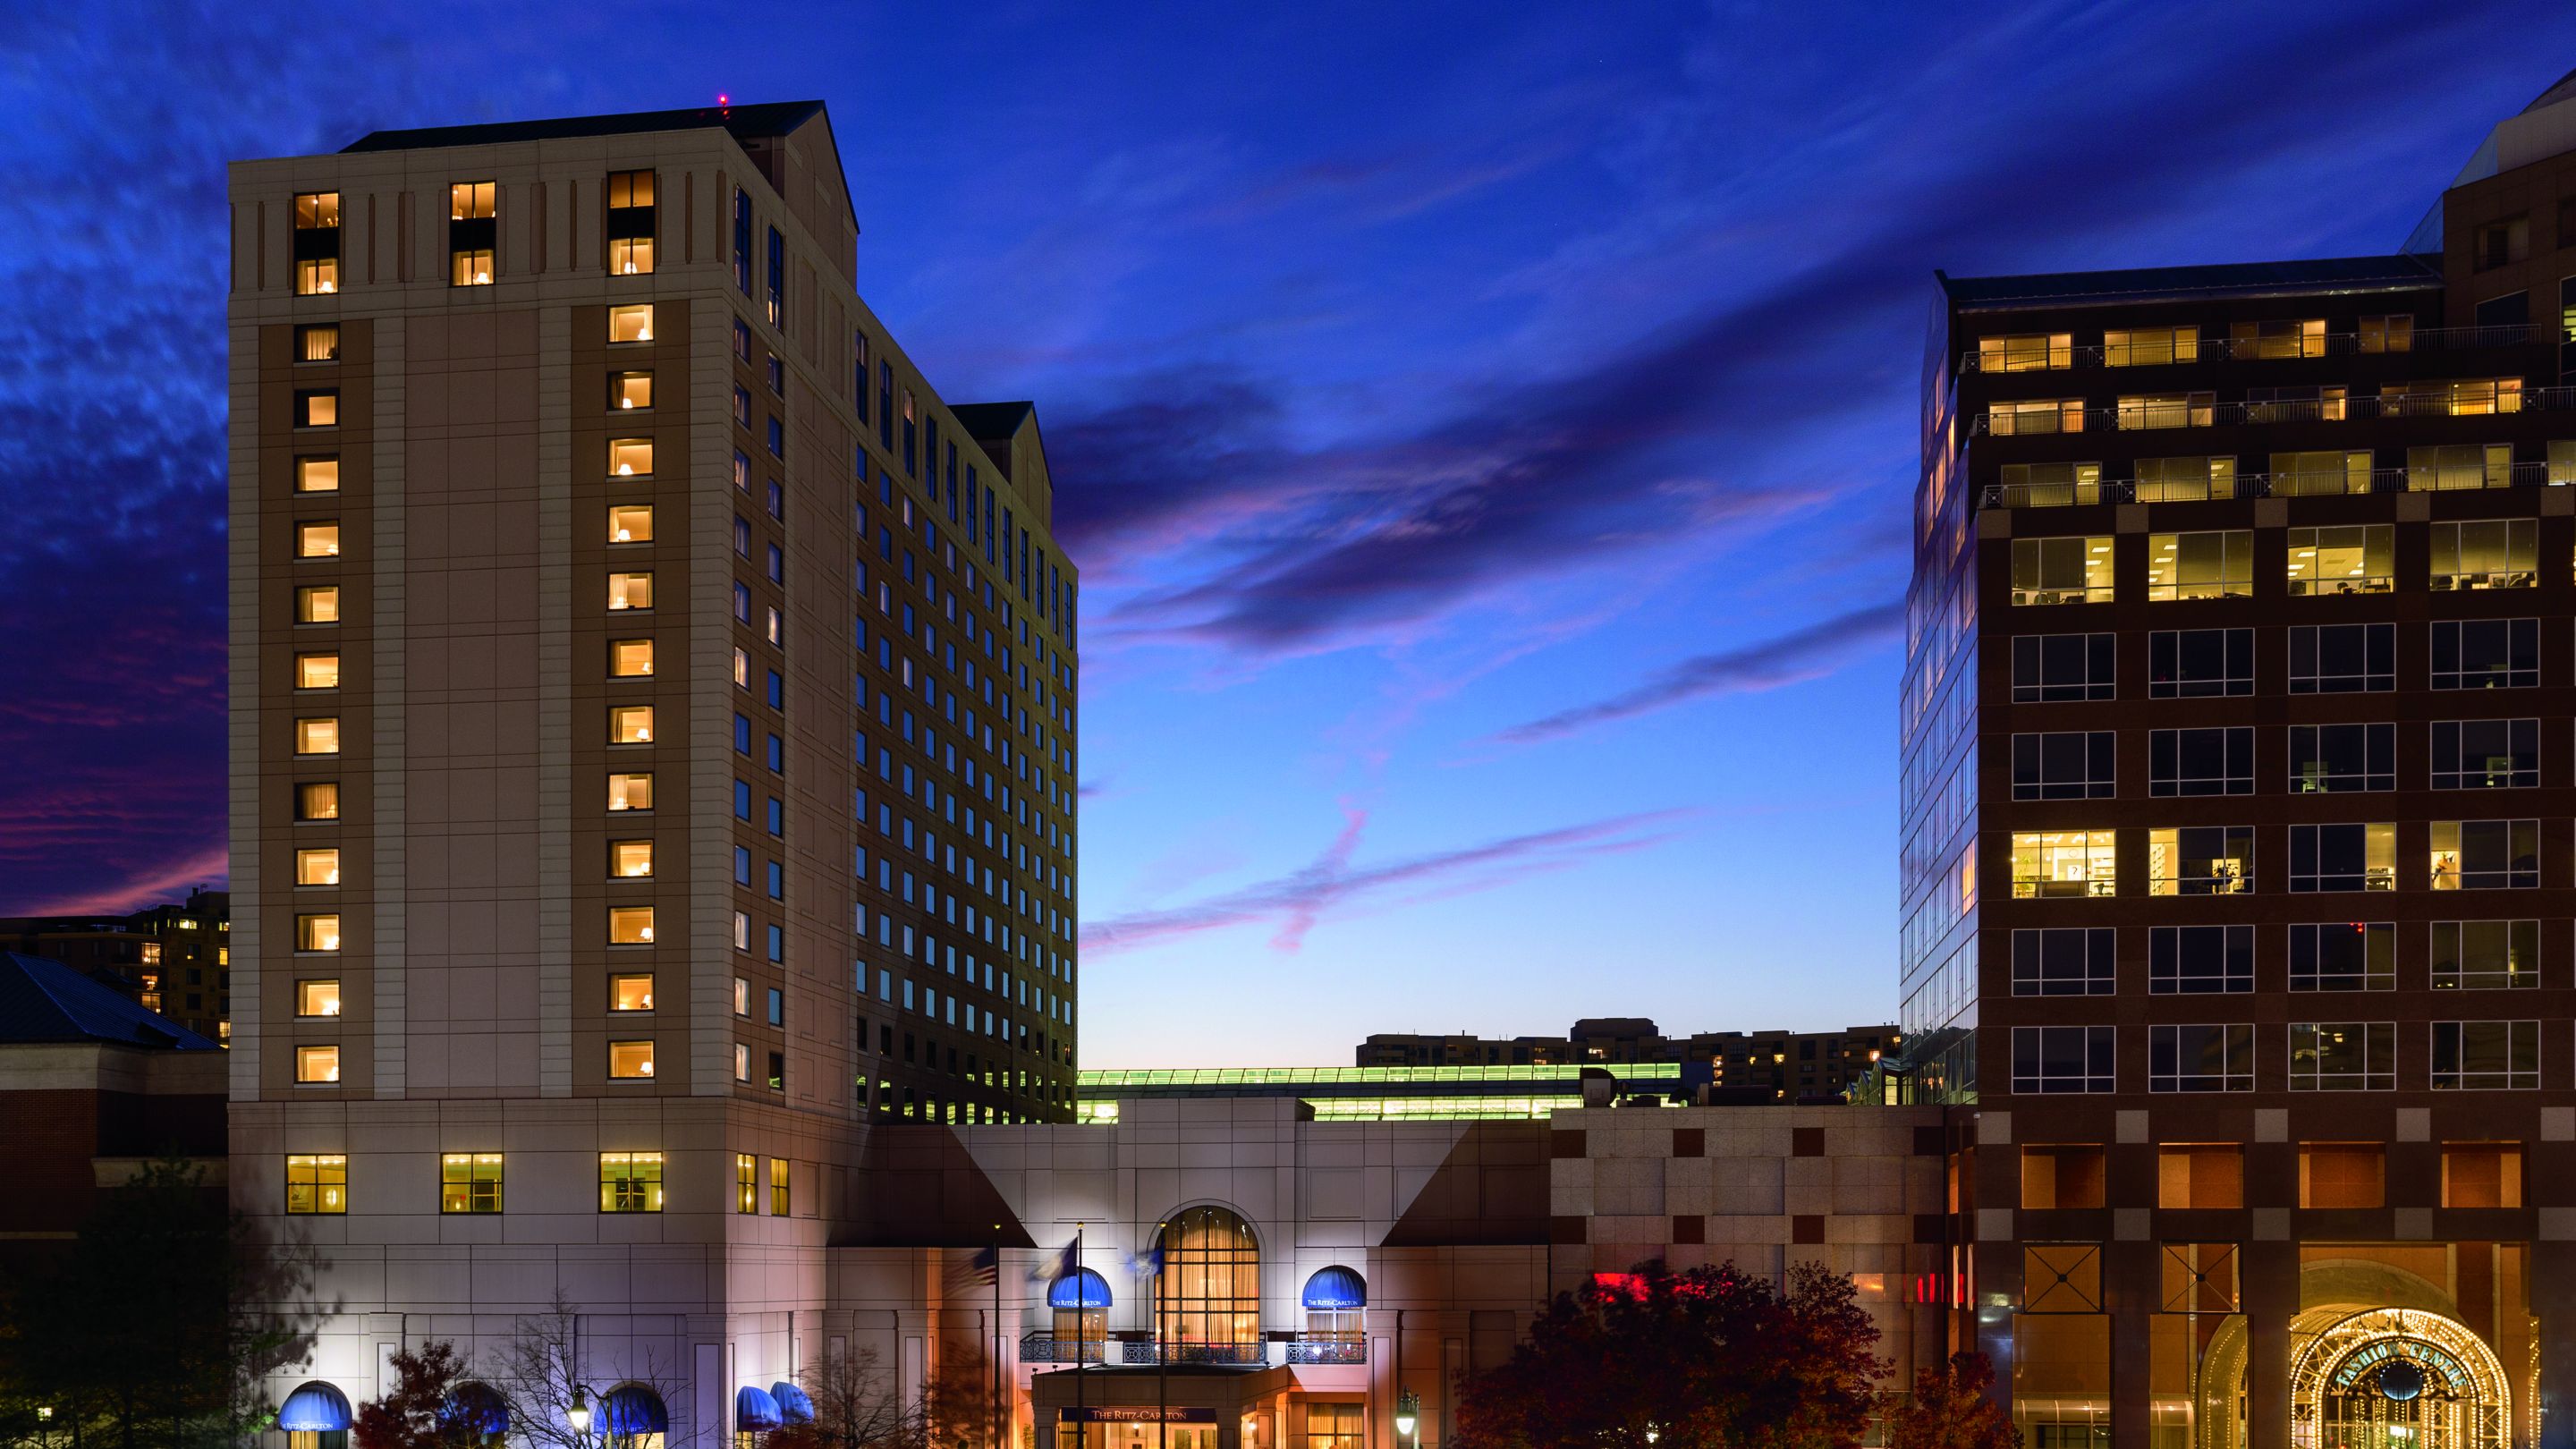 Reserve your stay at The Ritz-Carlton, Pentagon City.